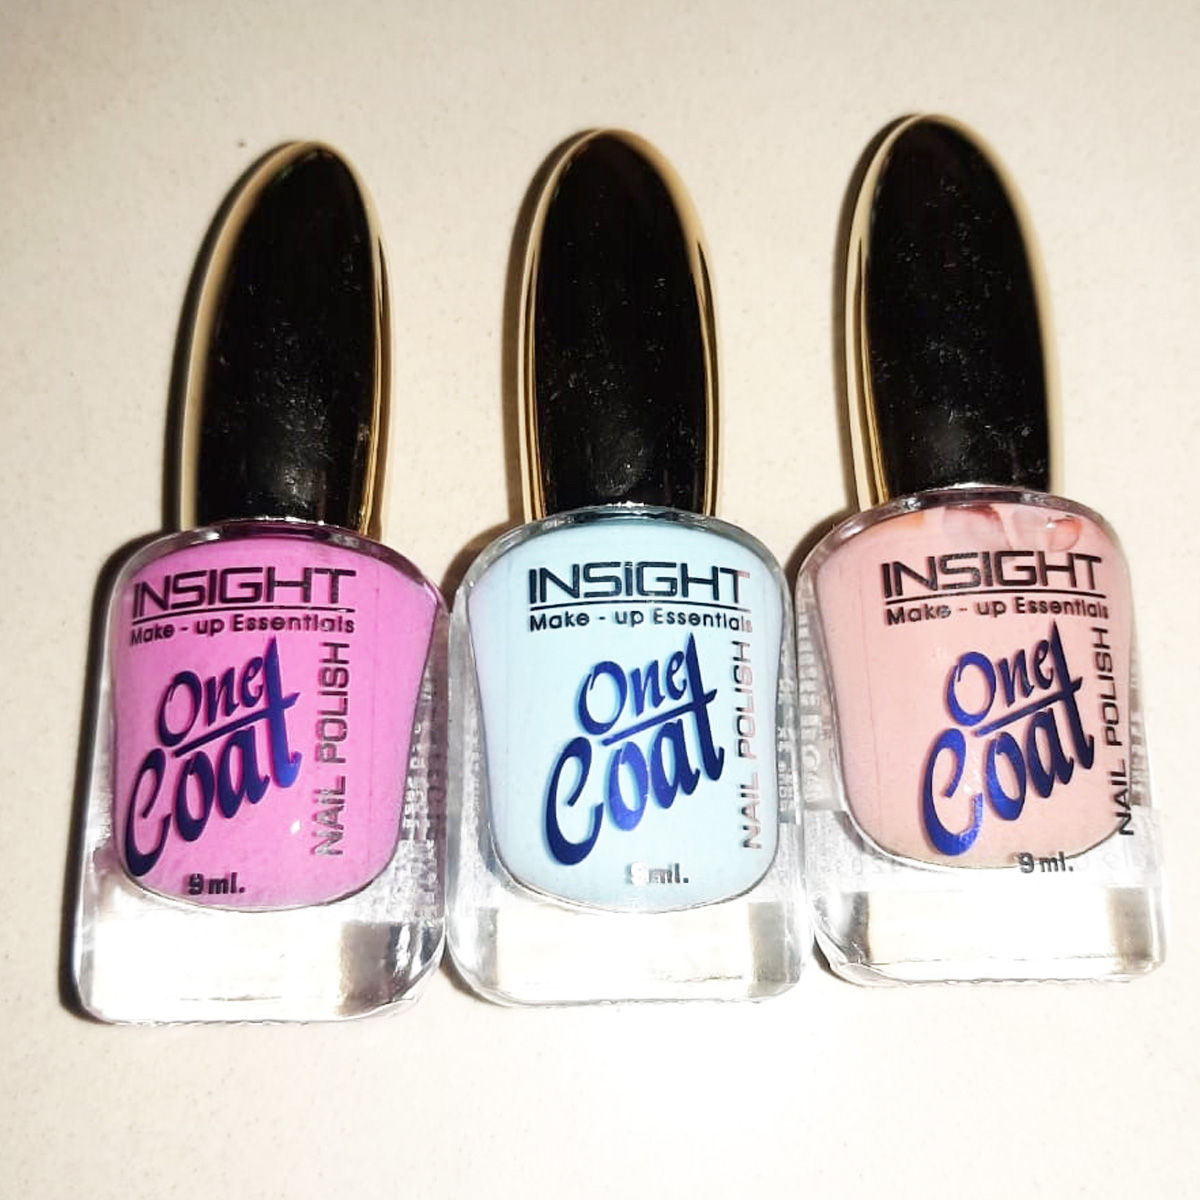 Insight nail polish pack of 5 price 40,000 | Instagram